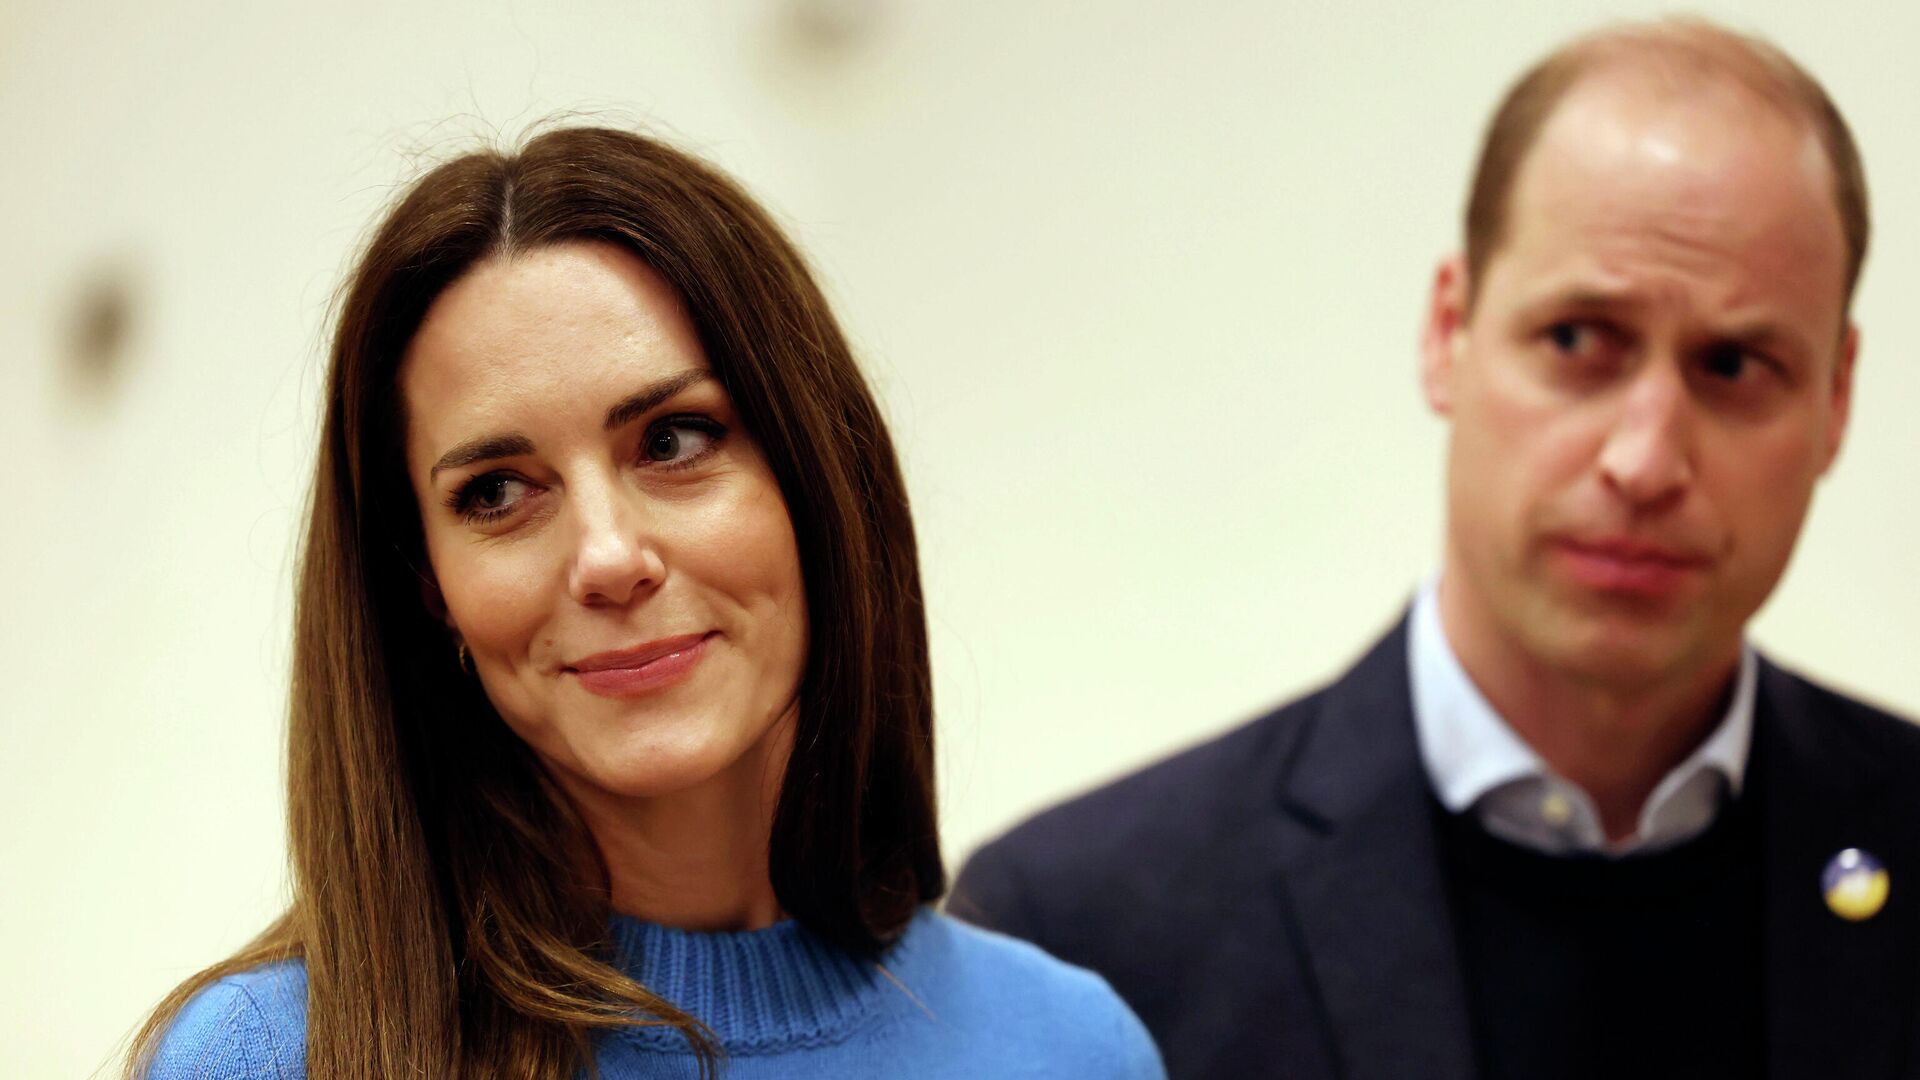 Britain's Prince William and Kate, Duchess of Cambridge visit the Ukrainian Cultural Centre in London, Wednesday, March 9, 2022, where they are meeting with members of the Ukrainian community and volunteers to learn about the efforts being made to support Ukrainians in the UK and across Europe - Sputnik International, 1920, 10.03.2022